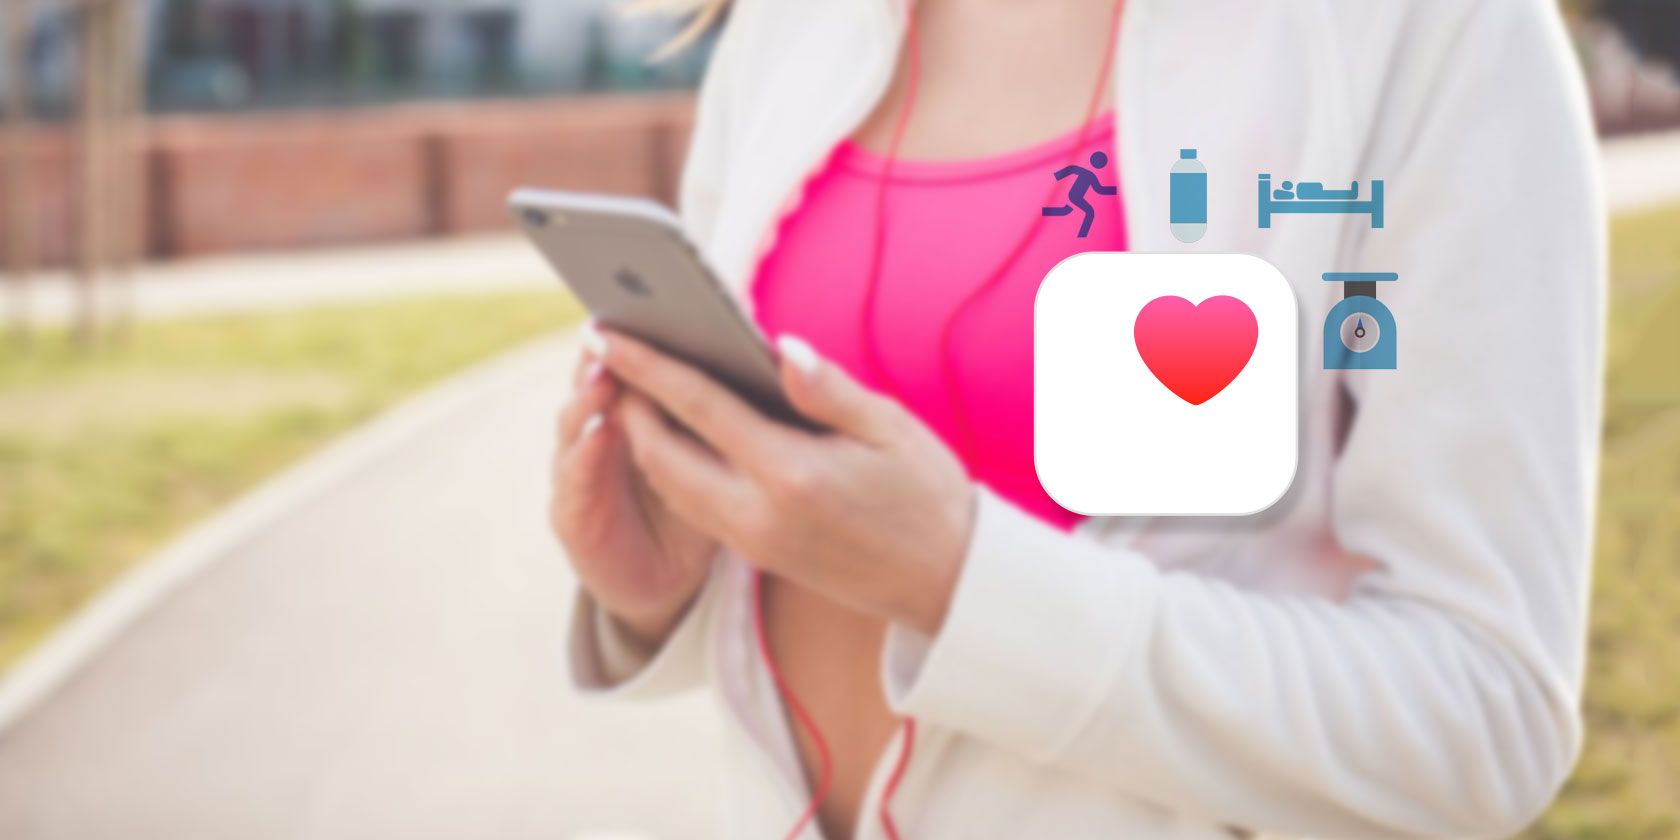 A Complete Guide to Your iPhone's Health App and How to Use It